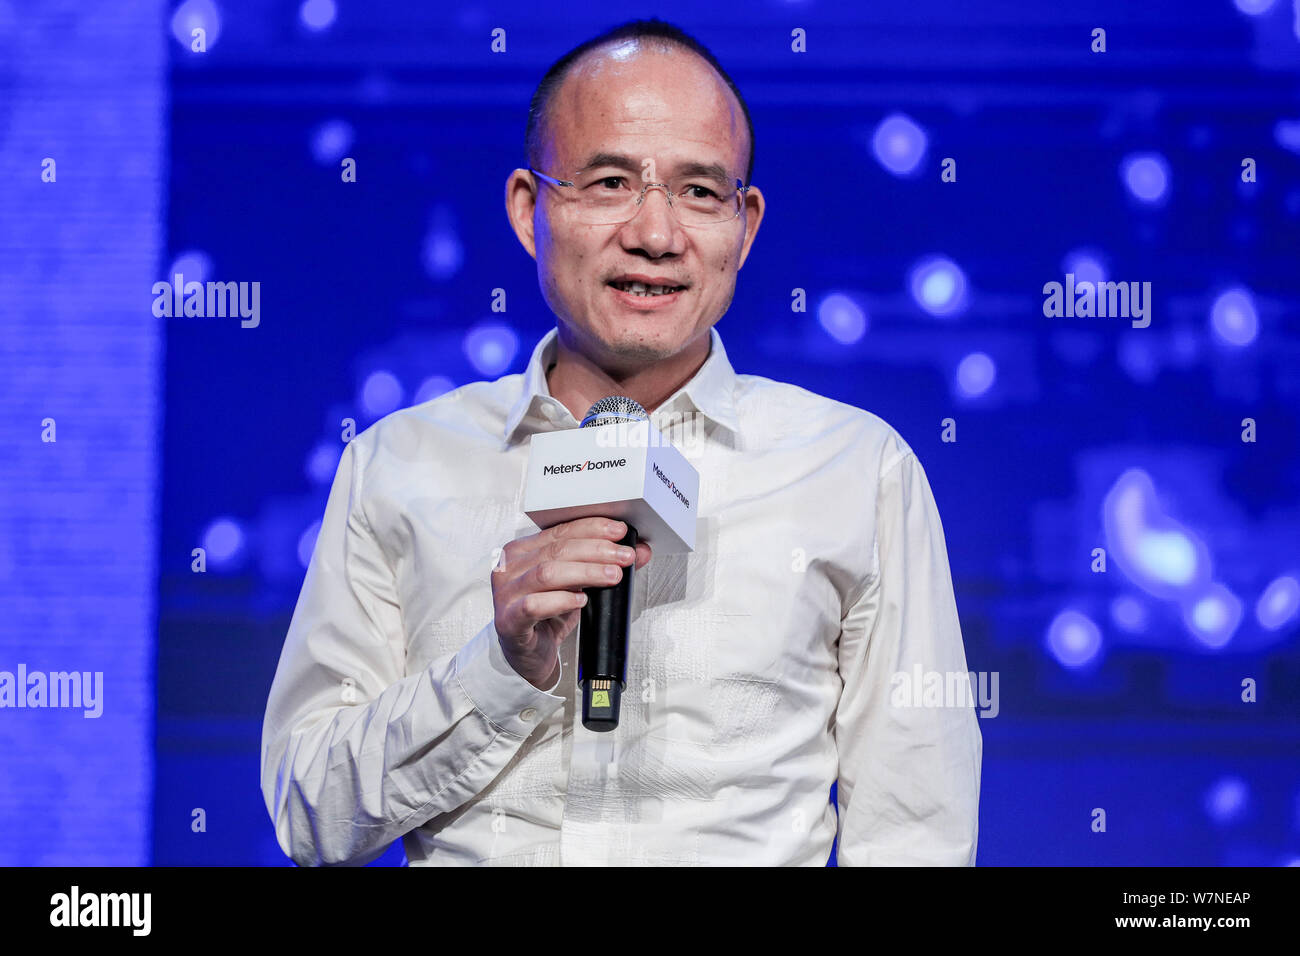 Guo Guangchang, chairman of Fosun Group, delivers a speech during the brand repositioning press conference for Chinese causalwear company Metersbonwe Stock Photo